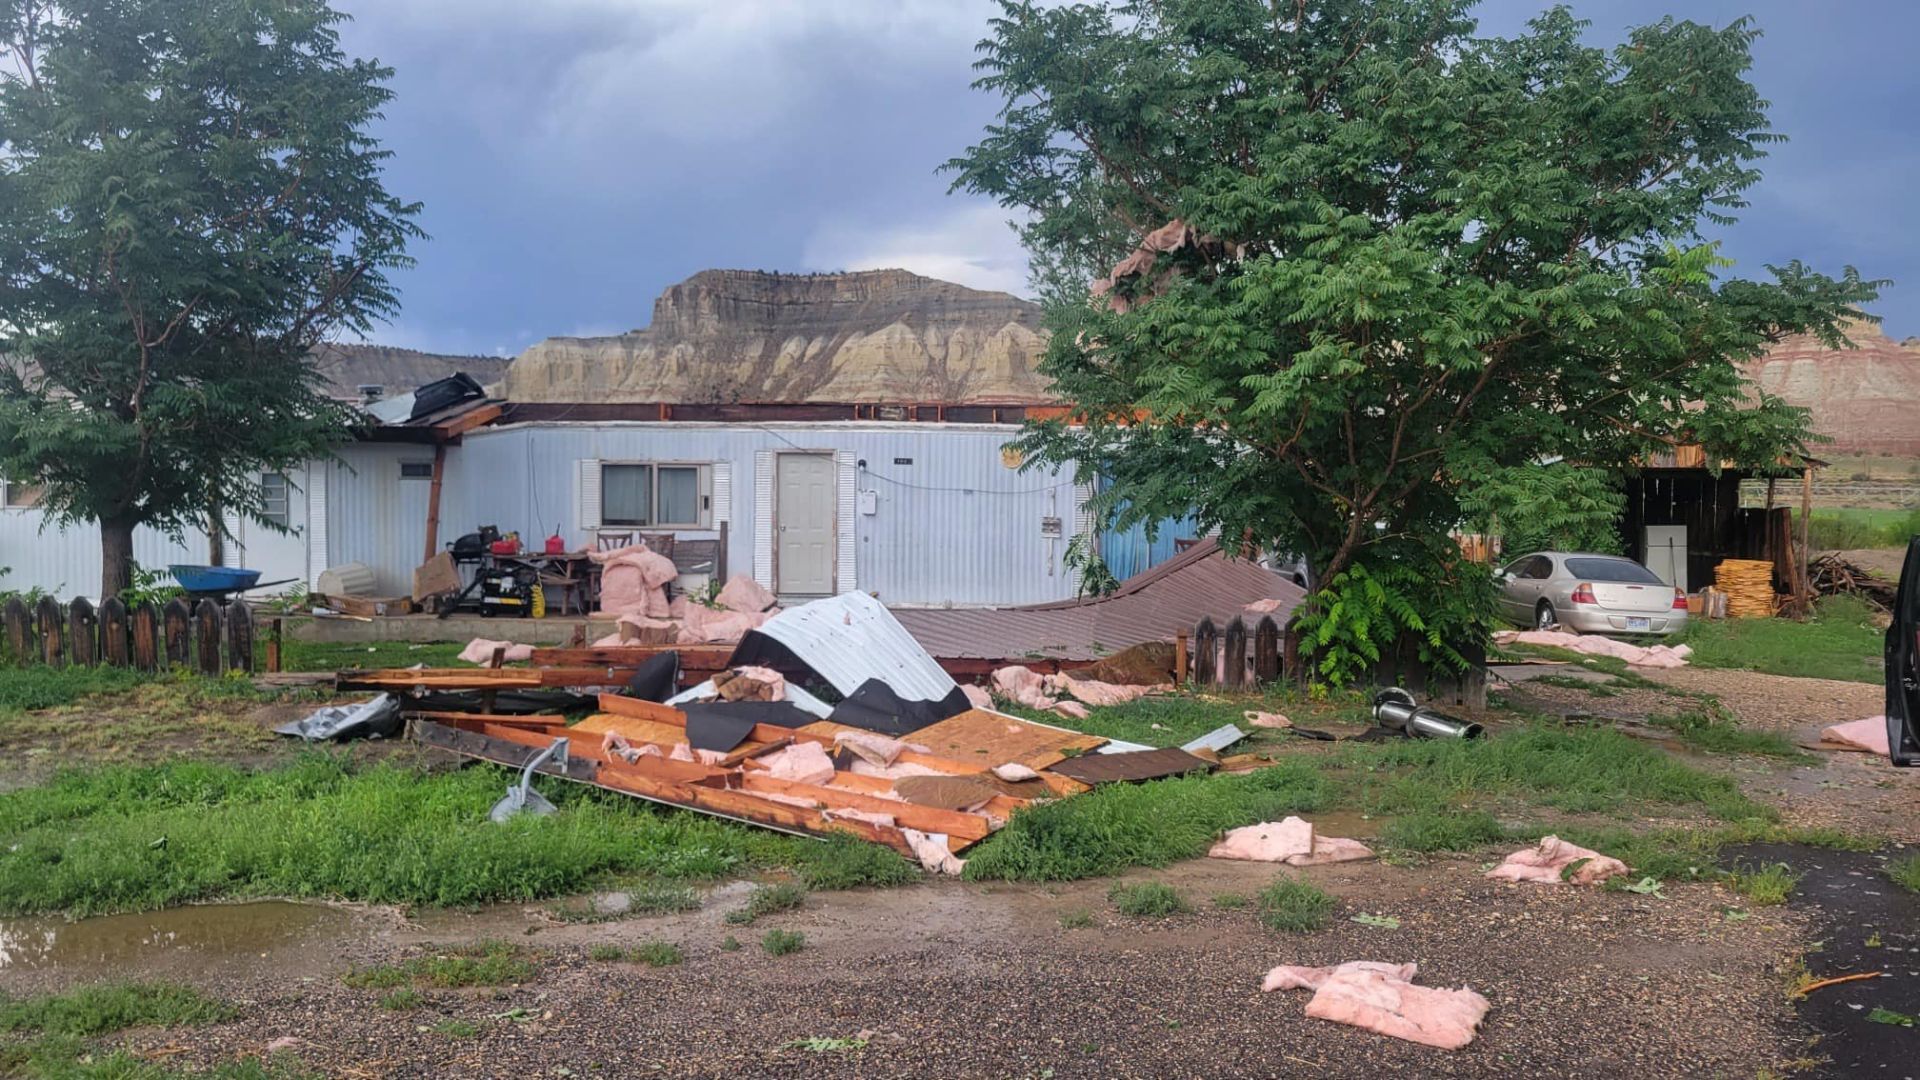  Wind blows roof off mobile home during Garfield County thunderstorm 